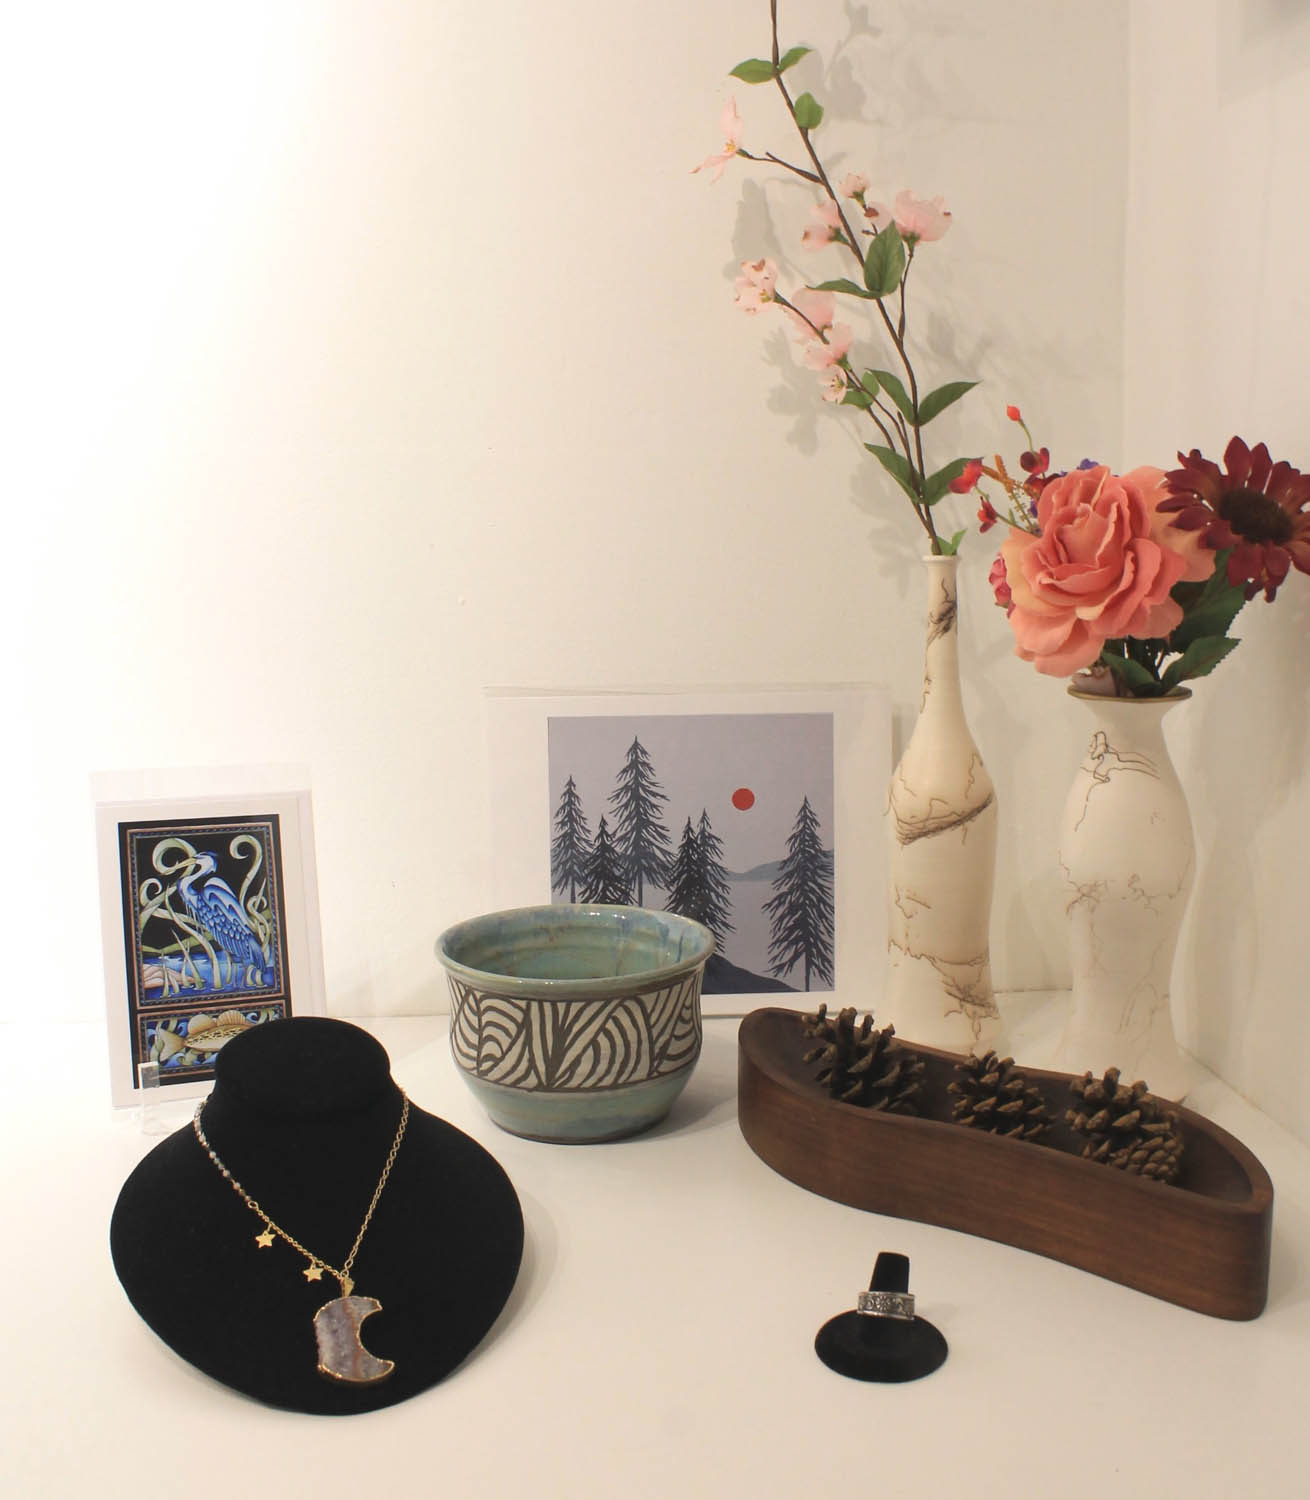 Moon shaped necklace on a black display beside a silver ring, cards, a green ceramic bowl